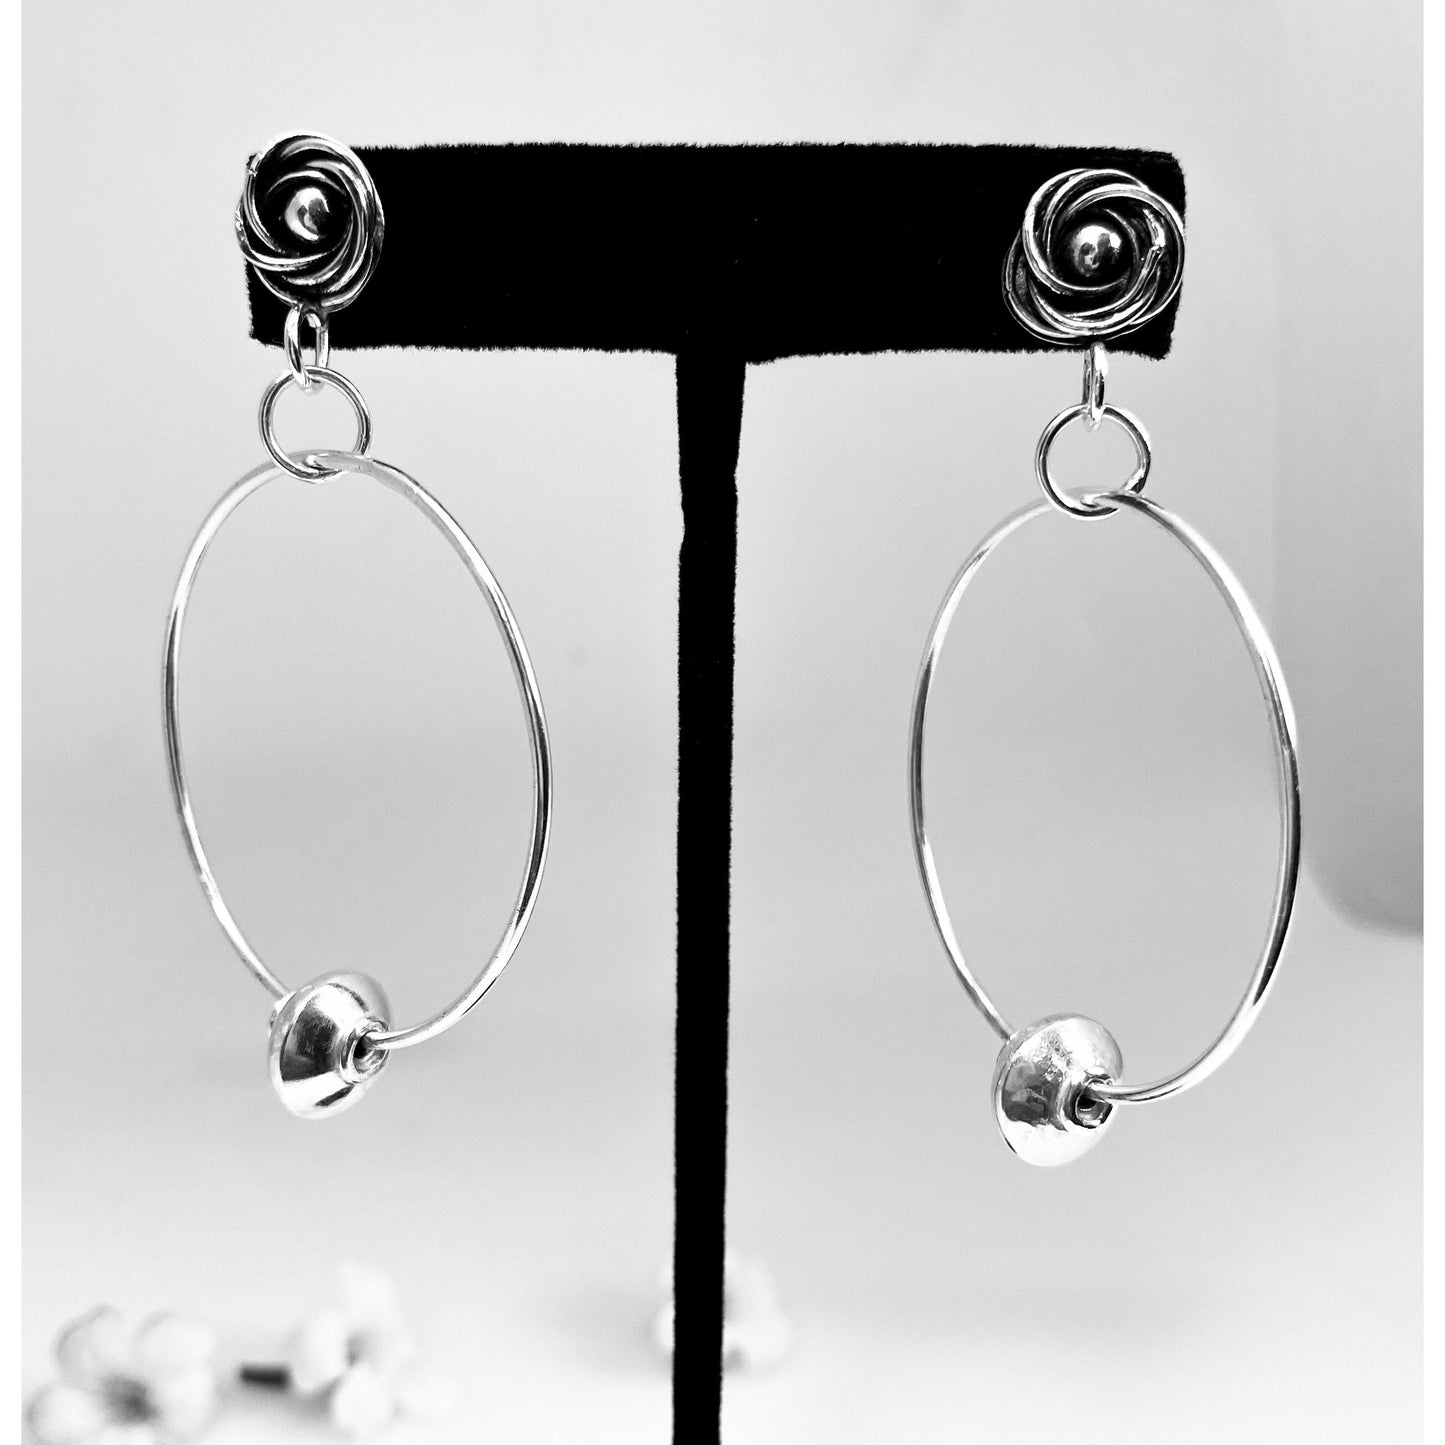 Large Hoop Earrings with Decorative Rosettes and Sterling Beads - Fine/Sterling Silver